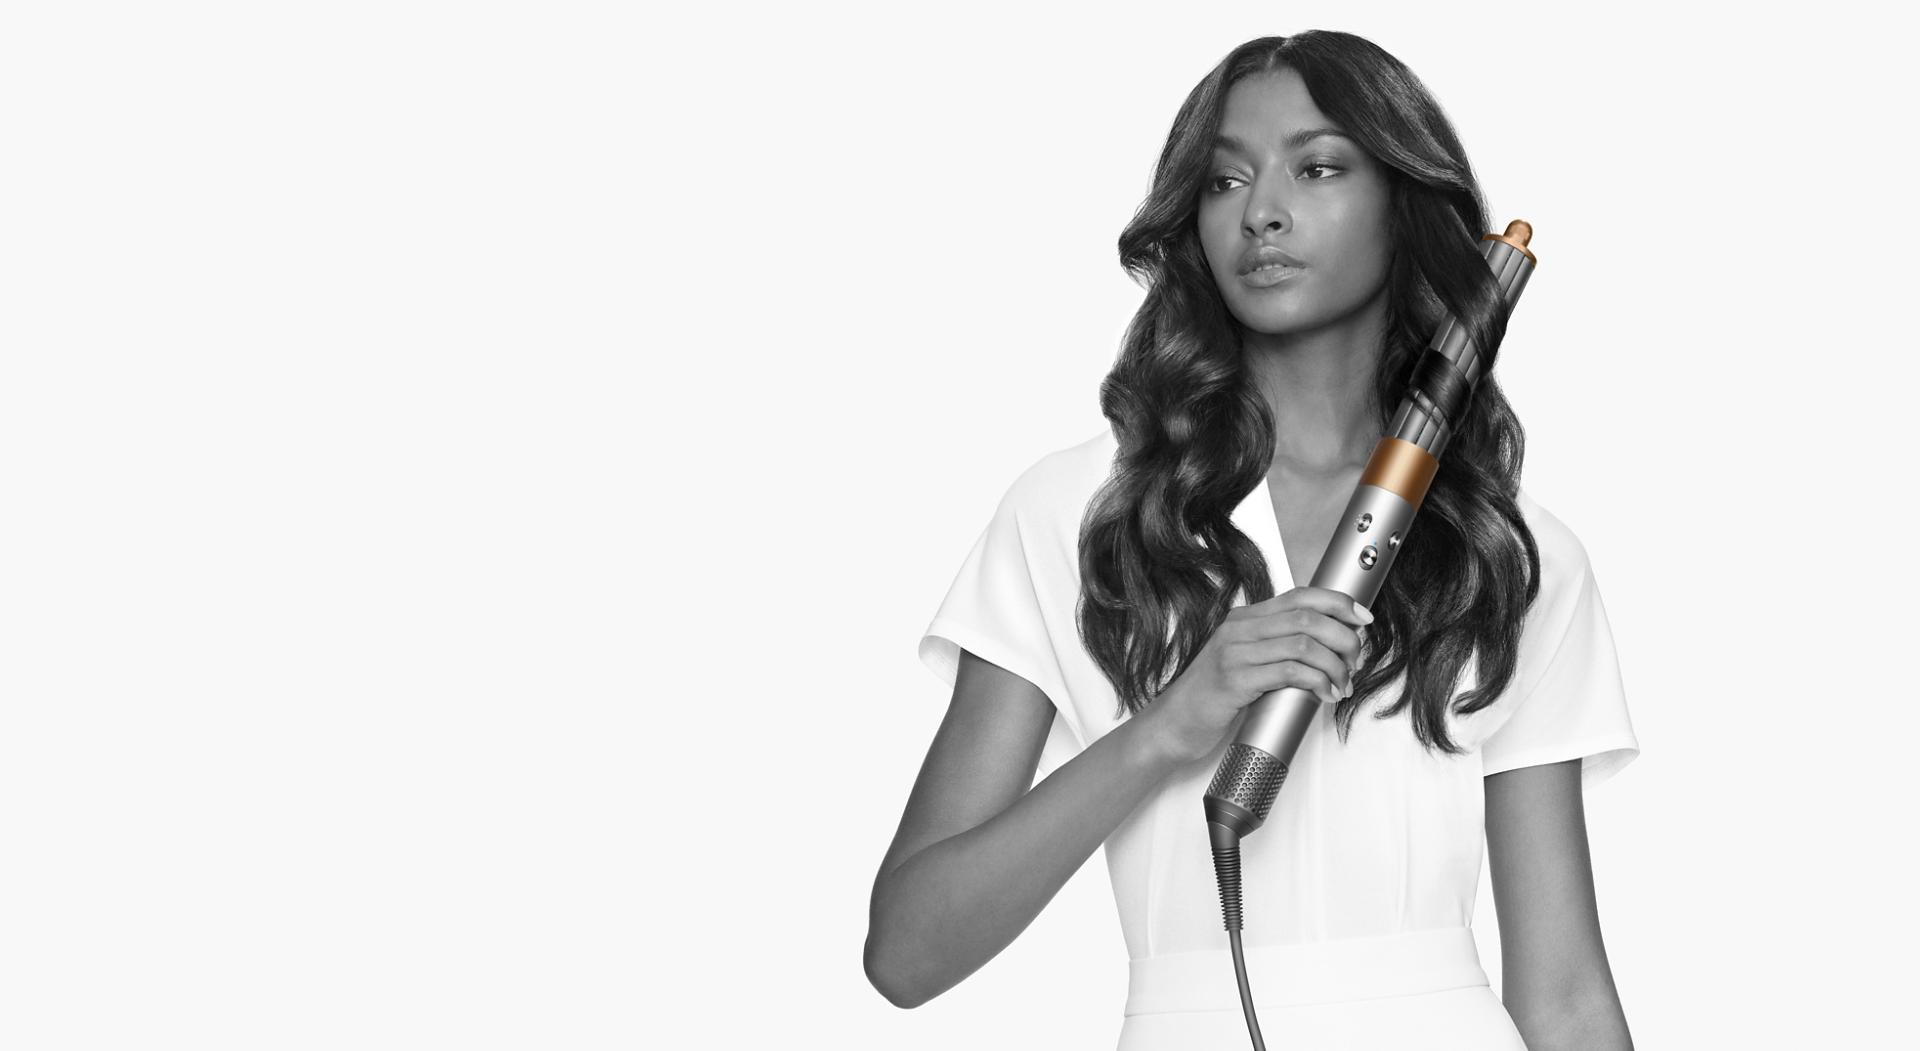 Model curls her hair with Dyson Airwrap multi-styler